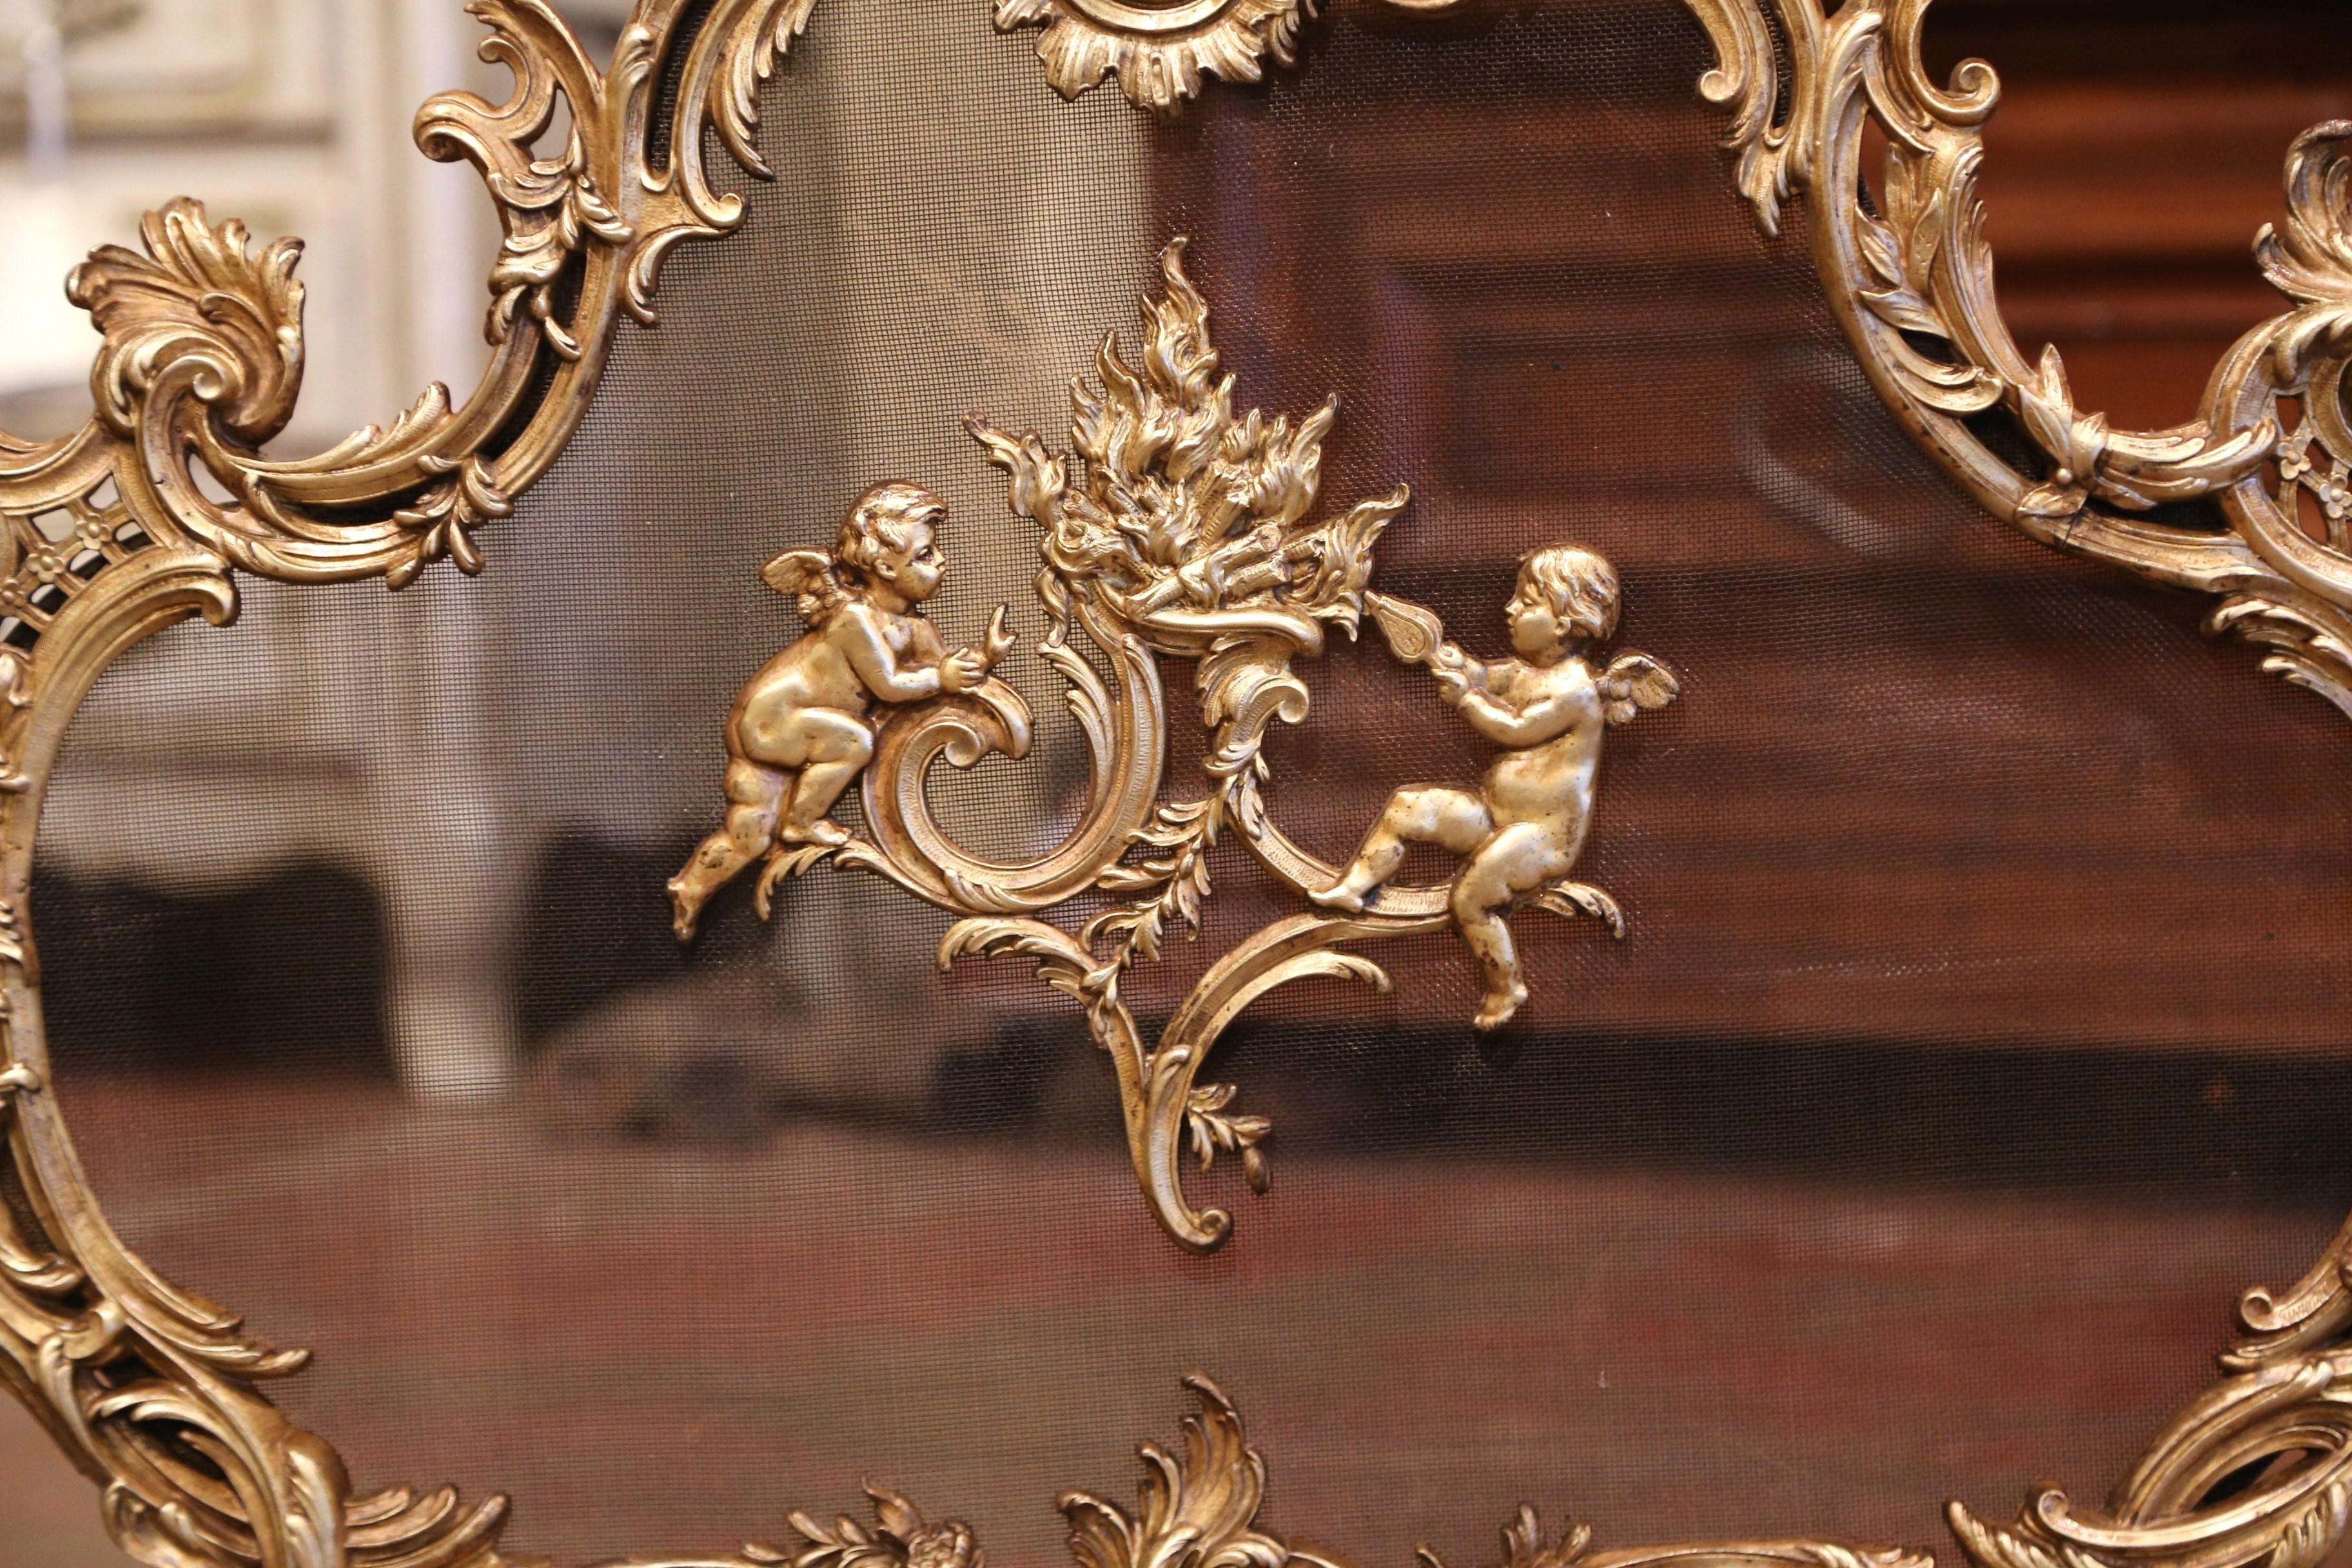 Gilt 19th Century French Louis XV Carved Bronze Doré Fireplace Screen with Cherubs